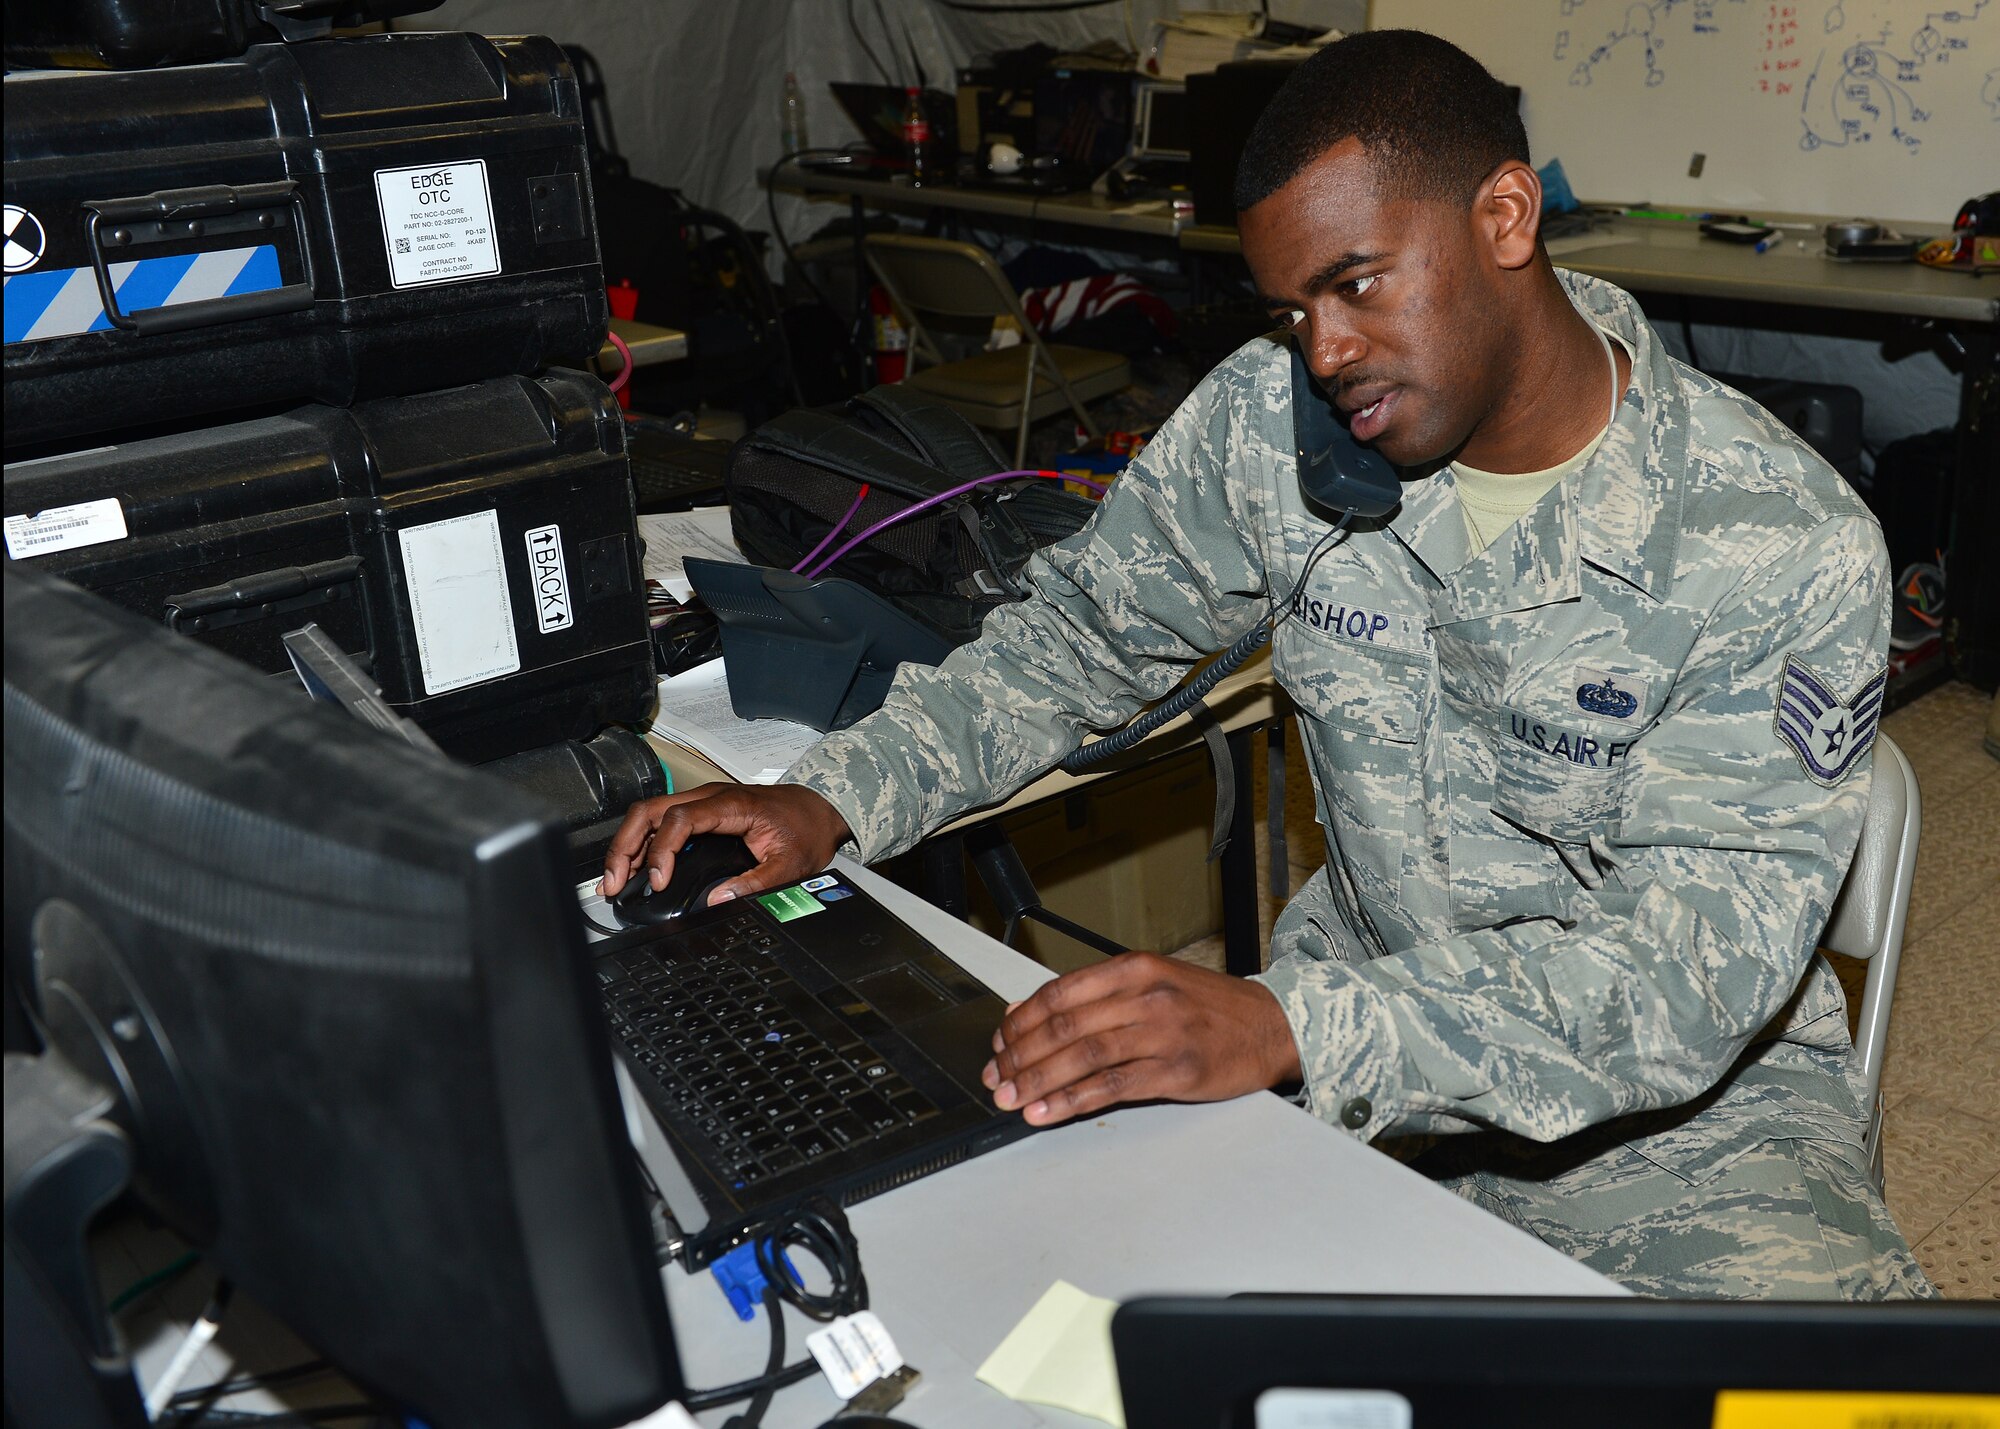 Staff Sgt. Shimir Bishop, 1st Combat Communications Squadron tactical network operations supervisor, from Ramstein Air Base, Germany, modifies a user account during exercise Juniper Cobra 16 in Israel, Feb. 22. Juniper Cobra uses ballistic missile defense computer simulations to train U.S. and Israeli service members while reinforcing a strong military relationship. For the first time, Airmen from the 1st CBCS, 52nd CBCS and soldiers from the 44th Expeditionary Signals Battalion work together to support U.S. European Command. (U.S. Air Force photo by Staff Sgt. Stephanie Longoria/Released)